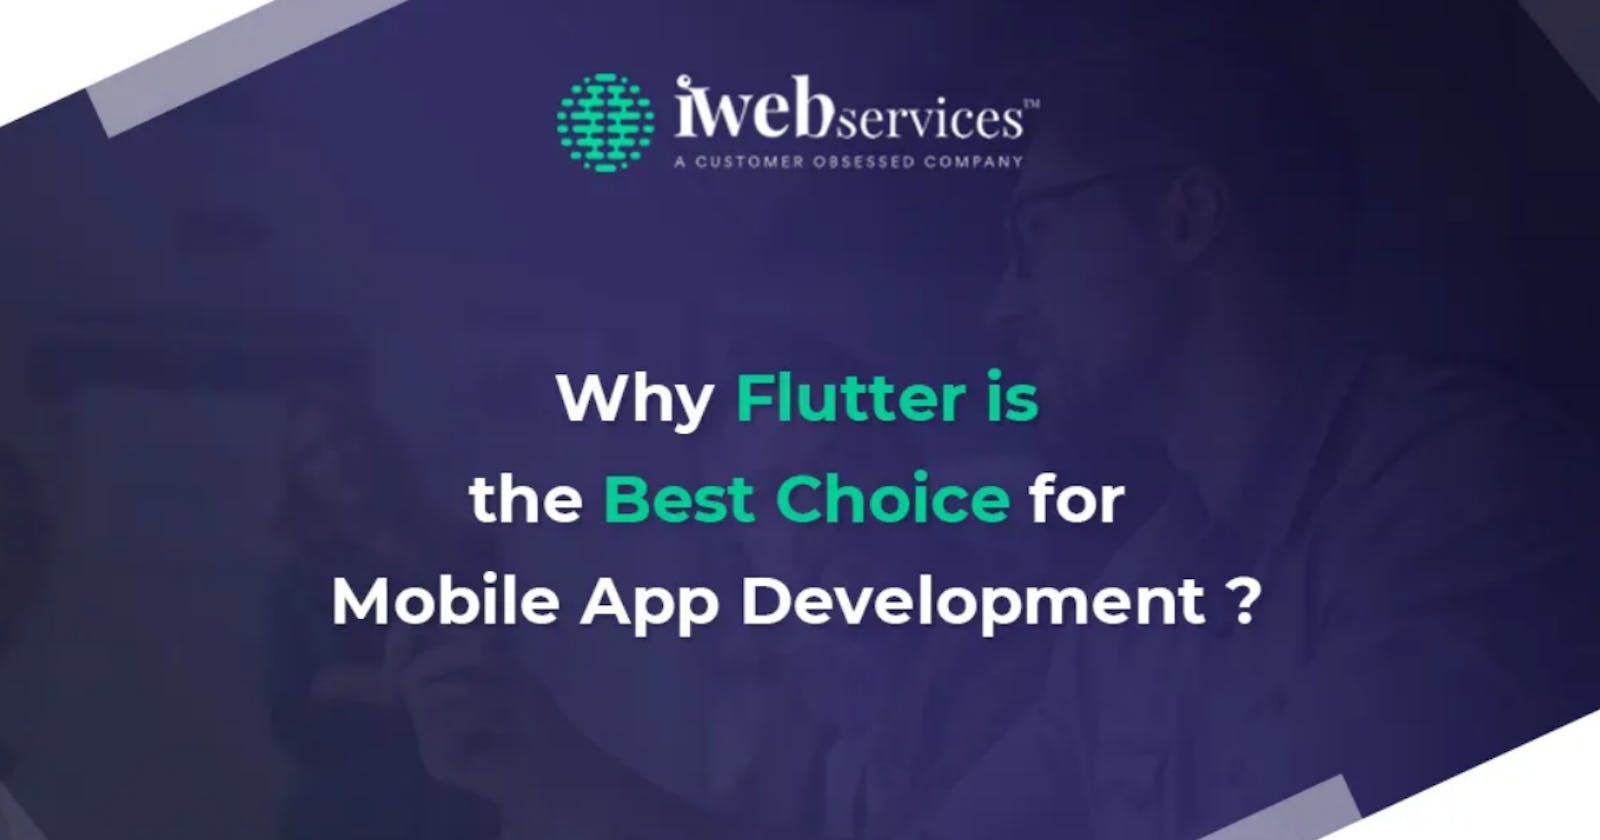 Why Flutter is the Best Choice for Mobile App Development?